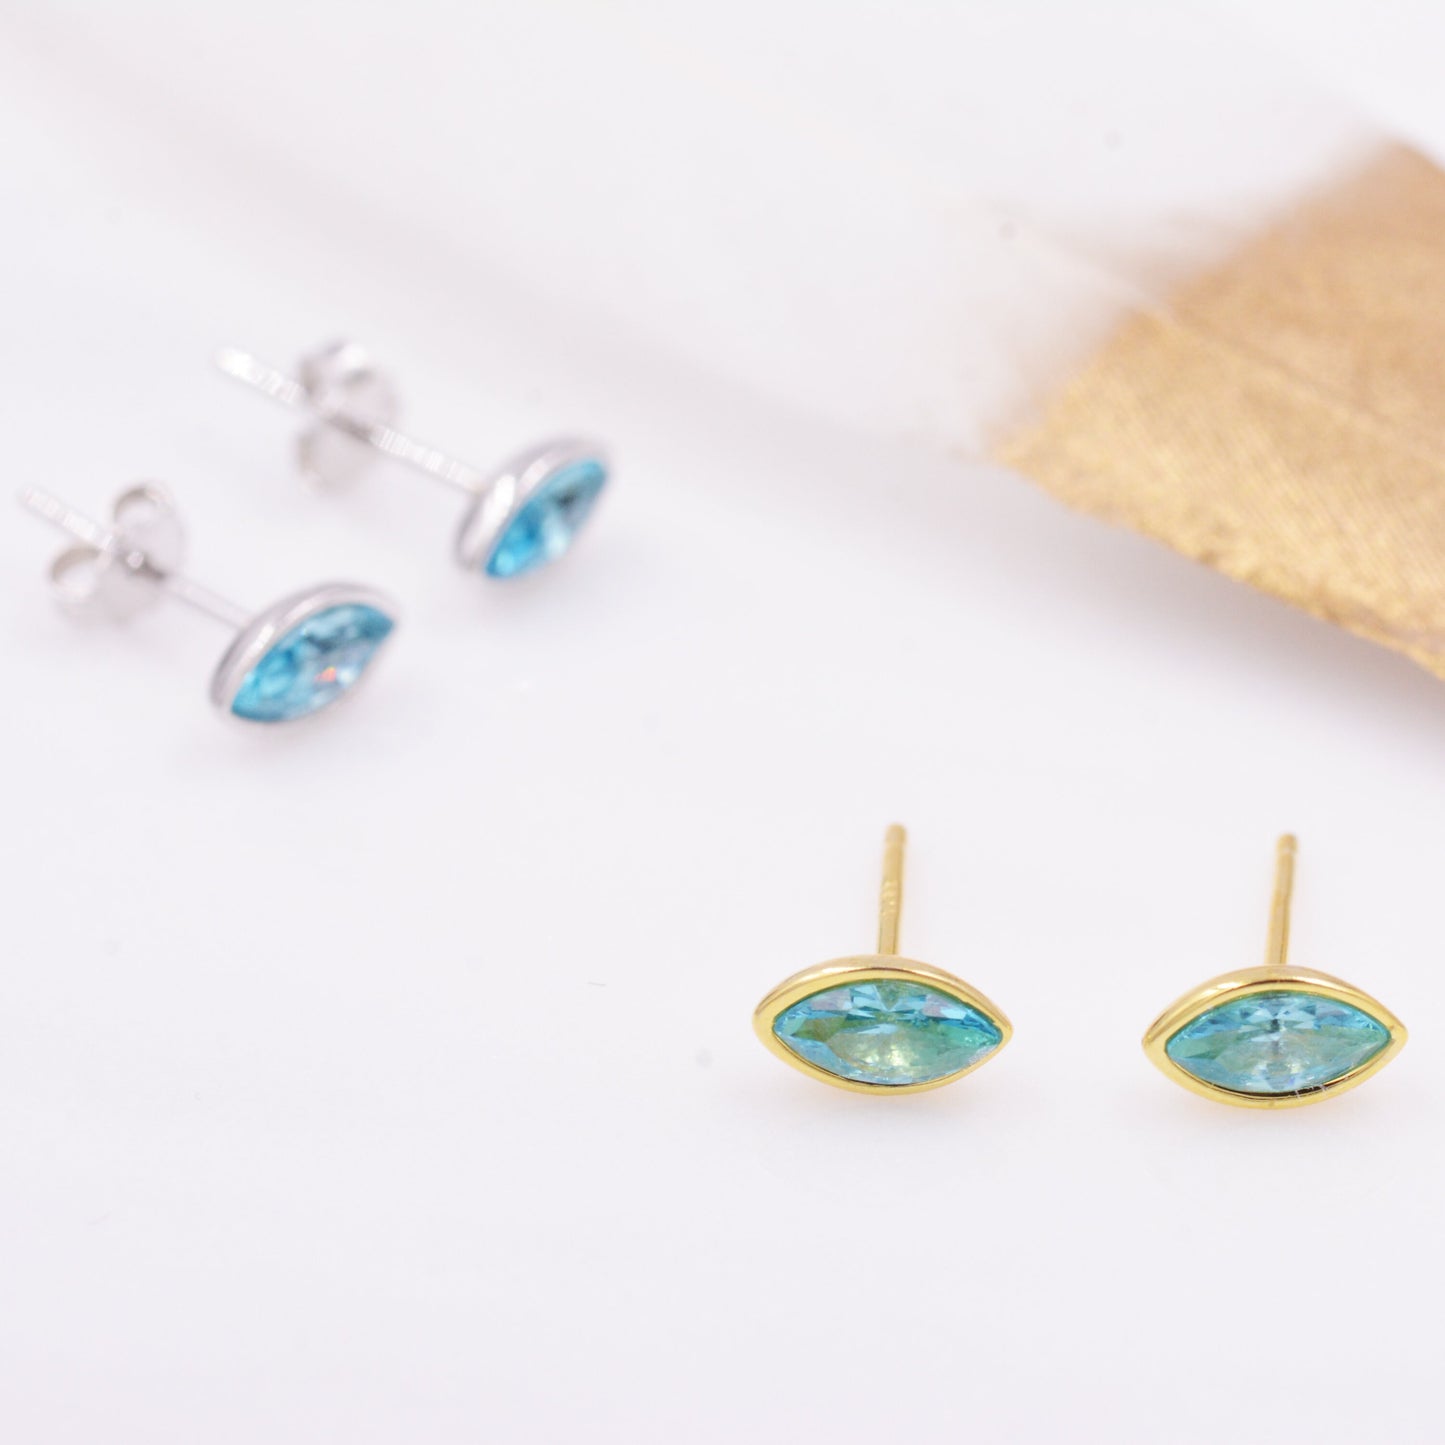 Blue Topaz Marquise Stud Earrings in Sterling Silver, Gold or Silver, Minimalist Geometric Design